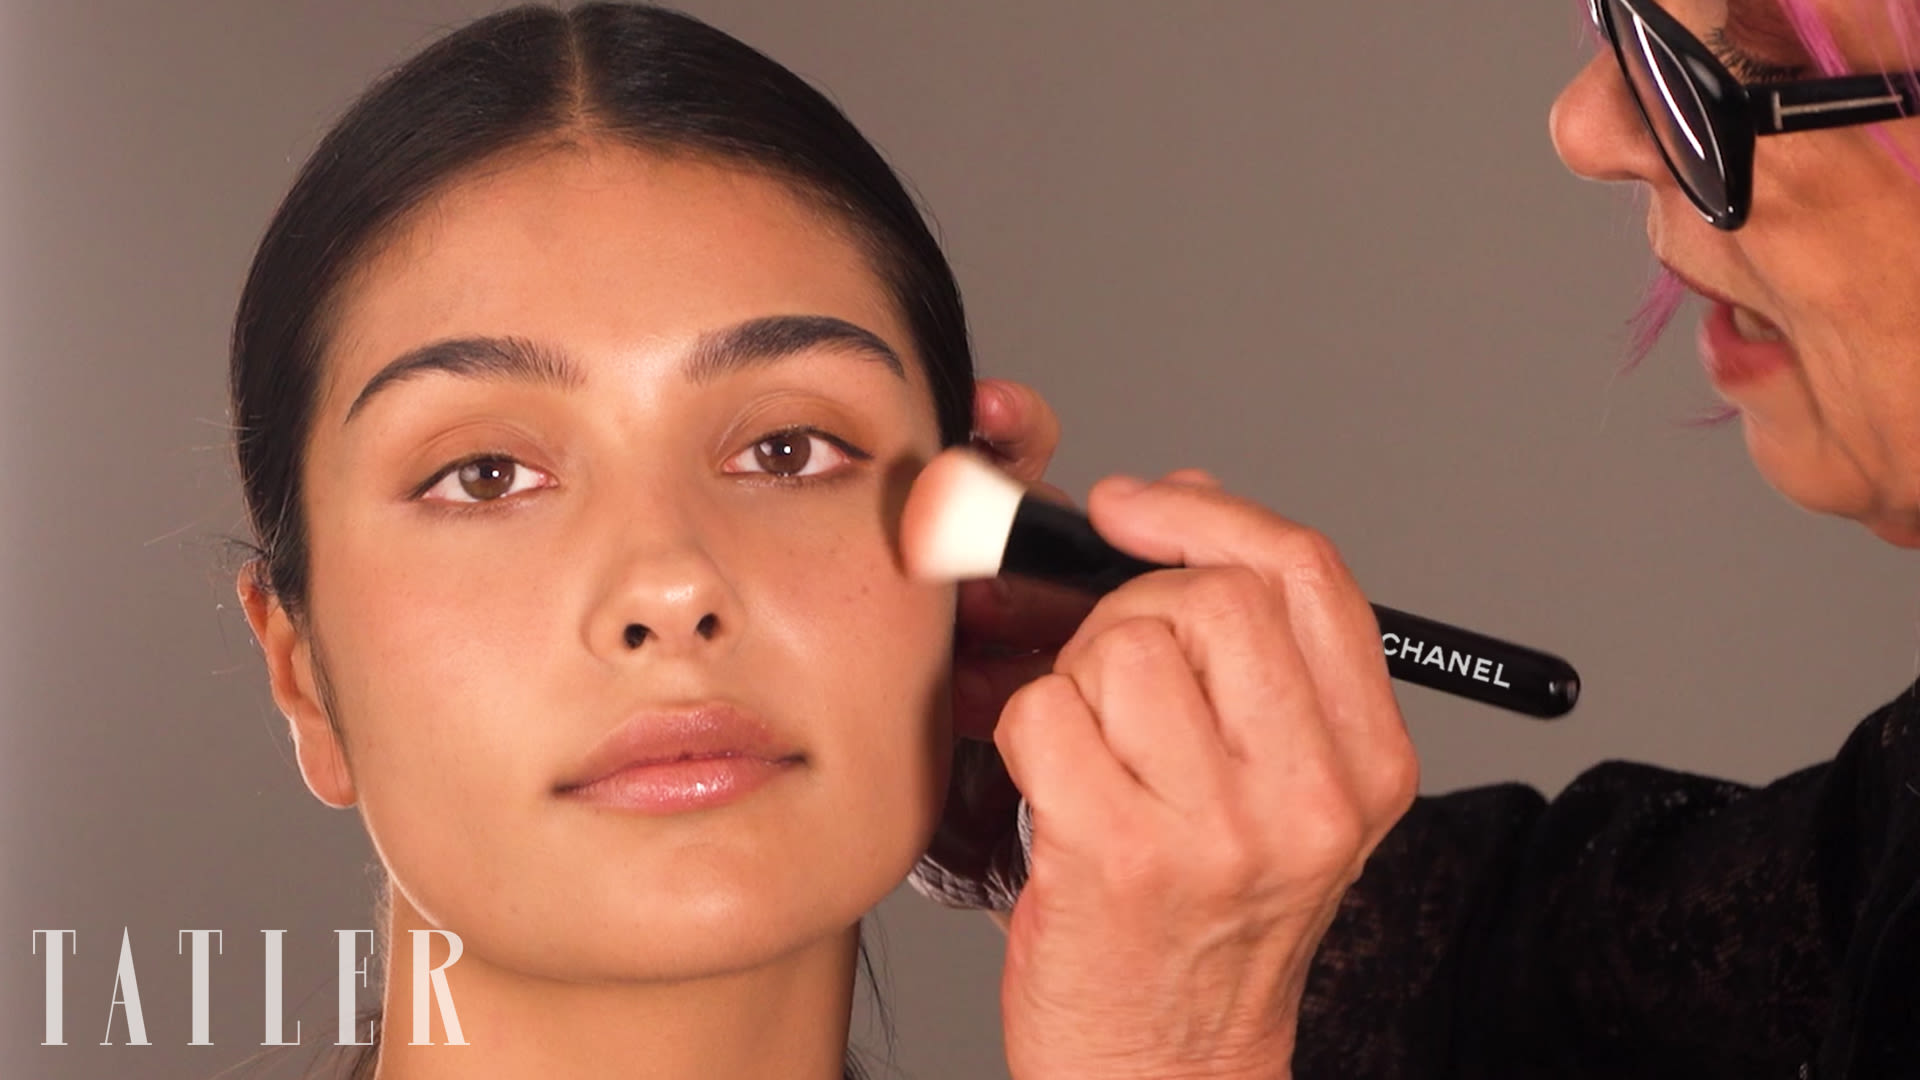 Watch 5 Easy Steps To Flawless Foundation: CHANEL Makeup Tutorial, Tatler  Schools Guide, Schools Guide